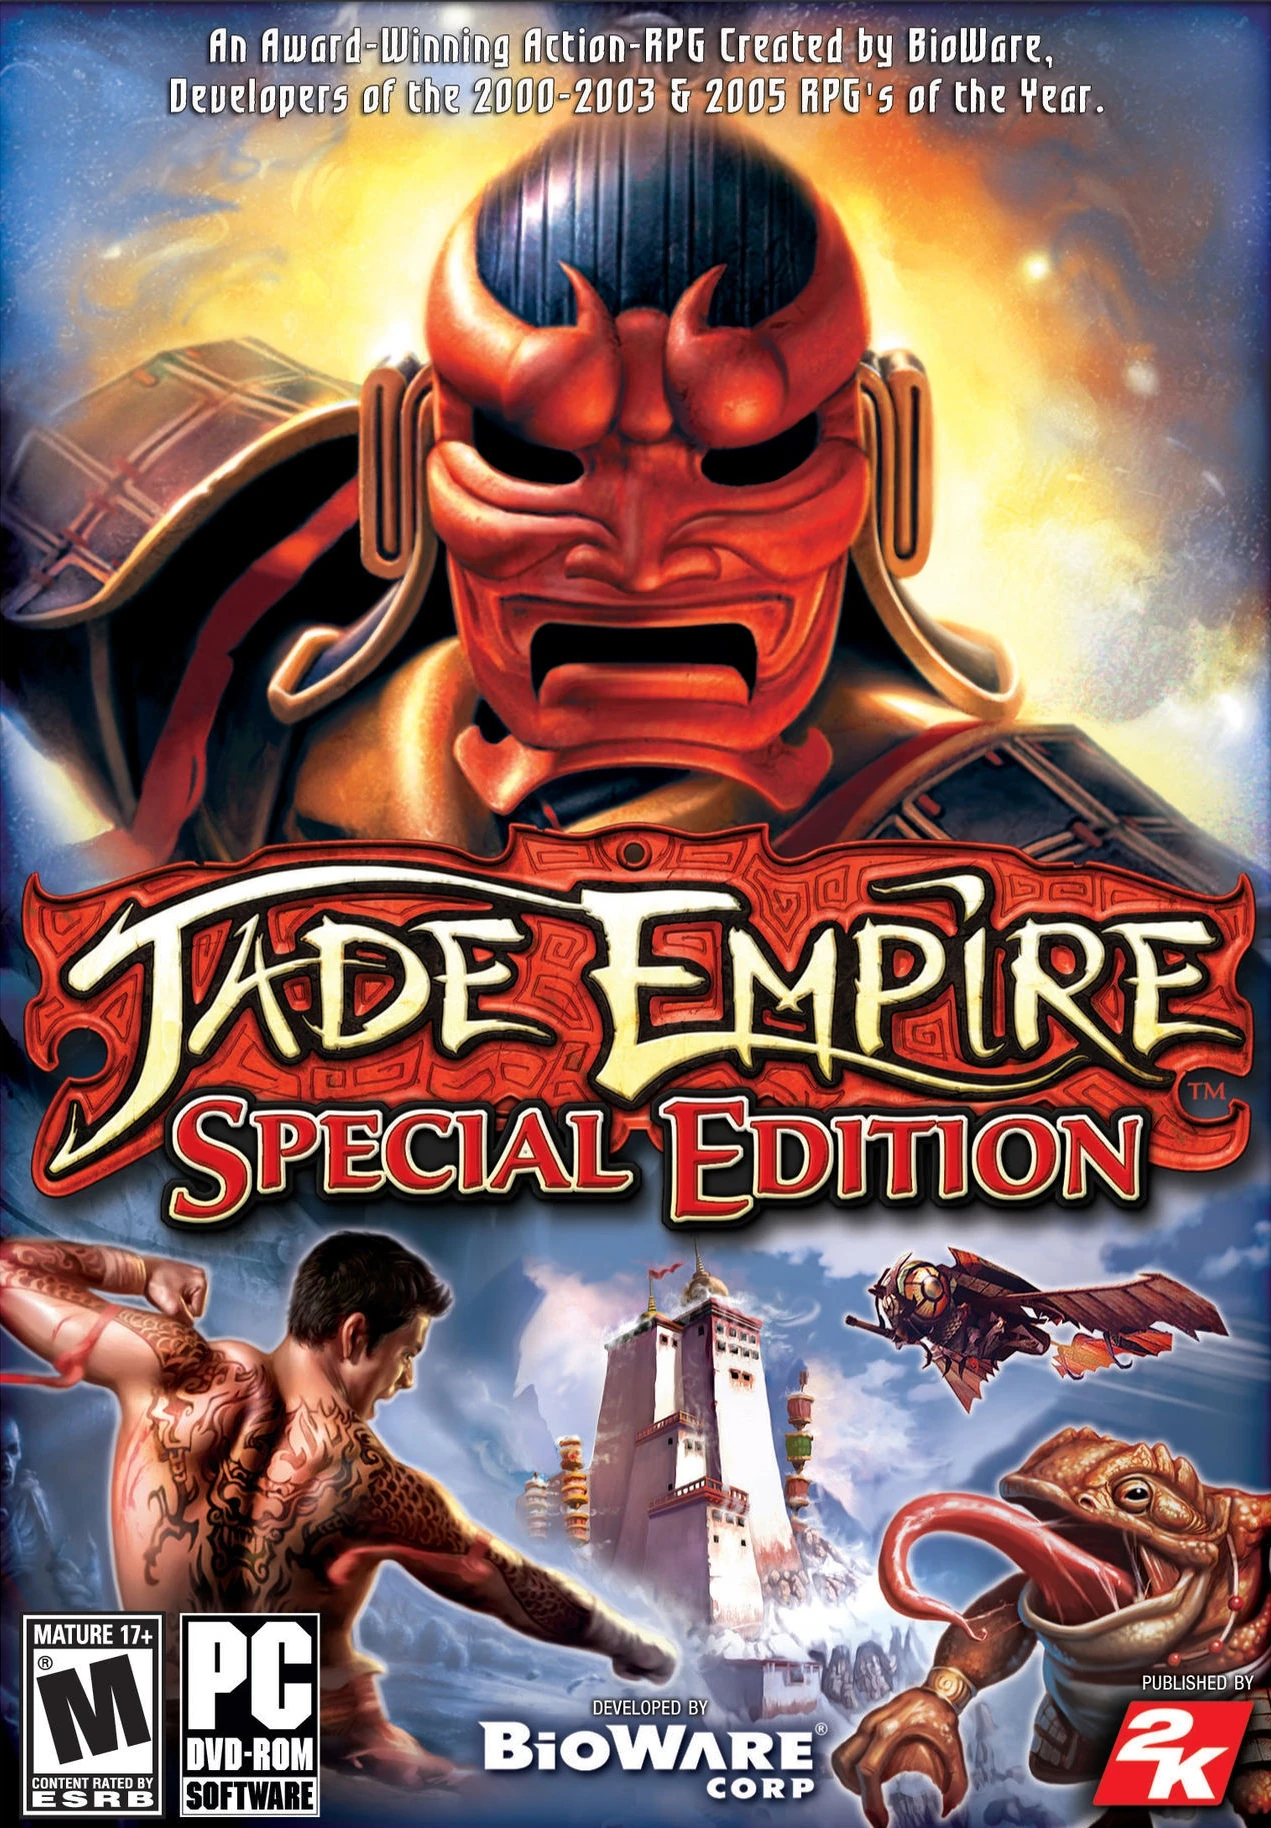 Download Jade Empire Special Edition Game for pc